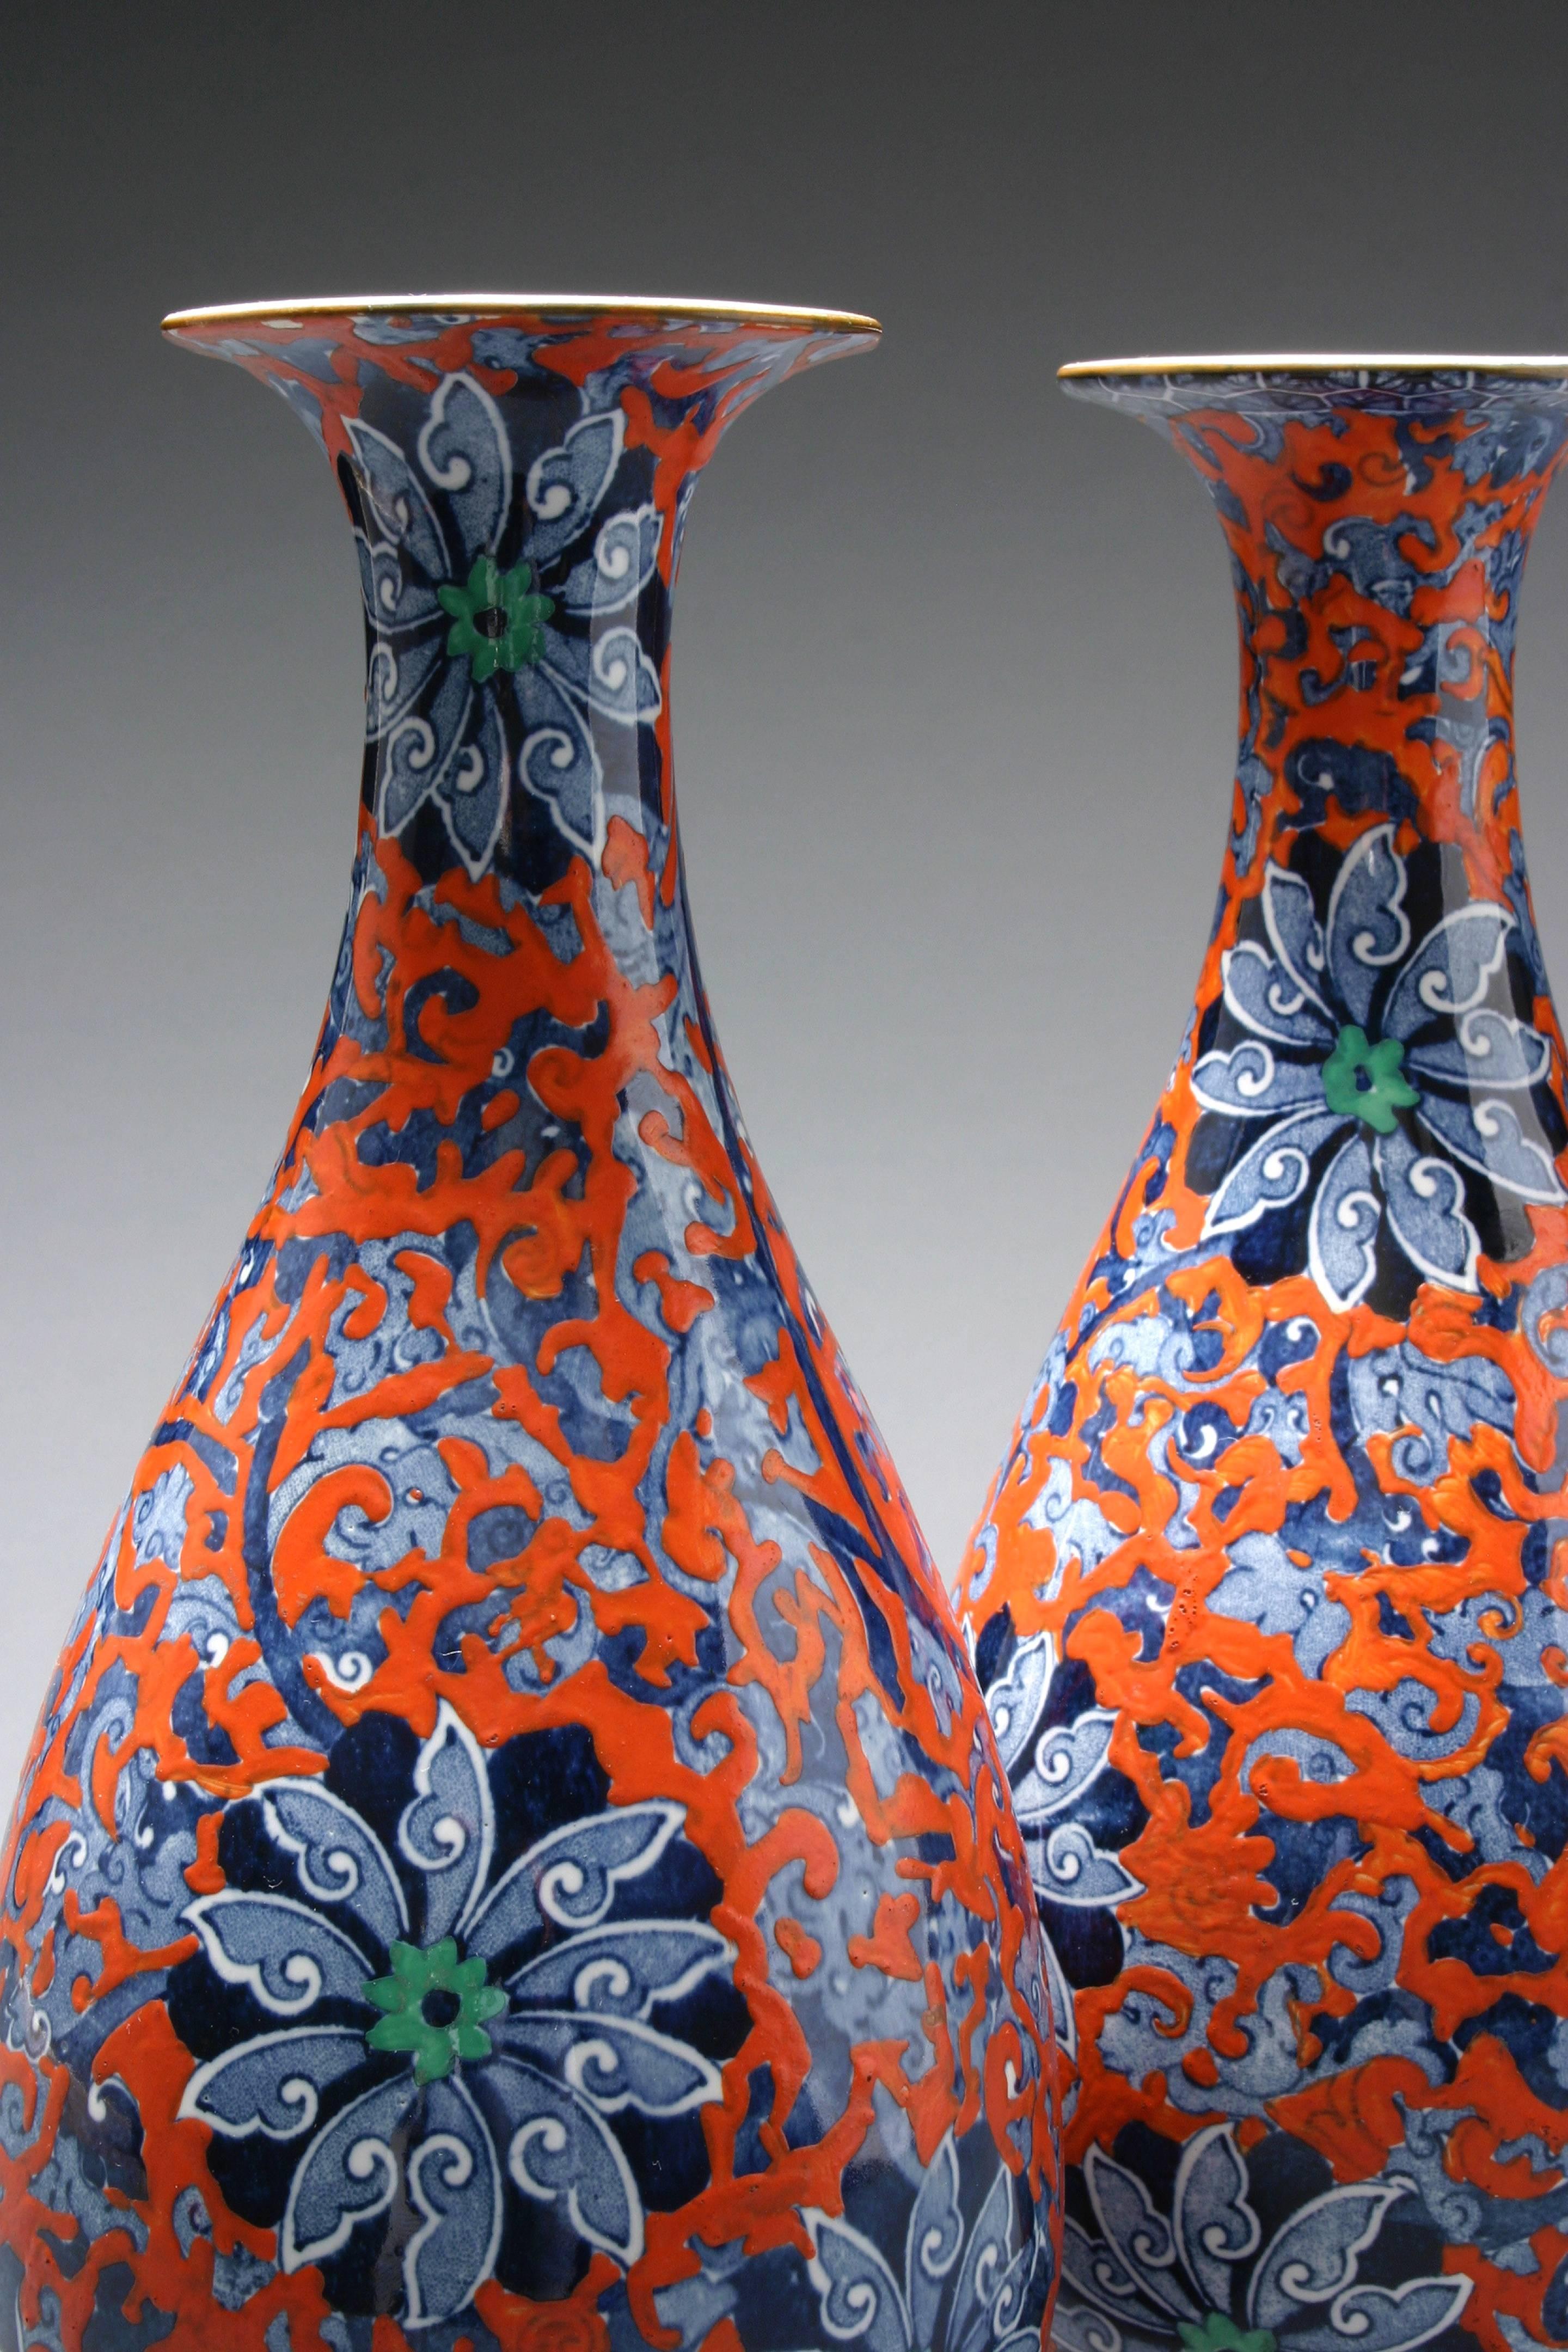 Very handsome vases with a beautiful polychrome design. Each of a slender bottle form with flared lip, decorated with exotic green and blue flowers issuing scolling vines, with a red overglaze. Marked: Chung Ro No. 631664 L & Co